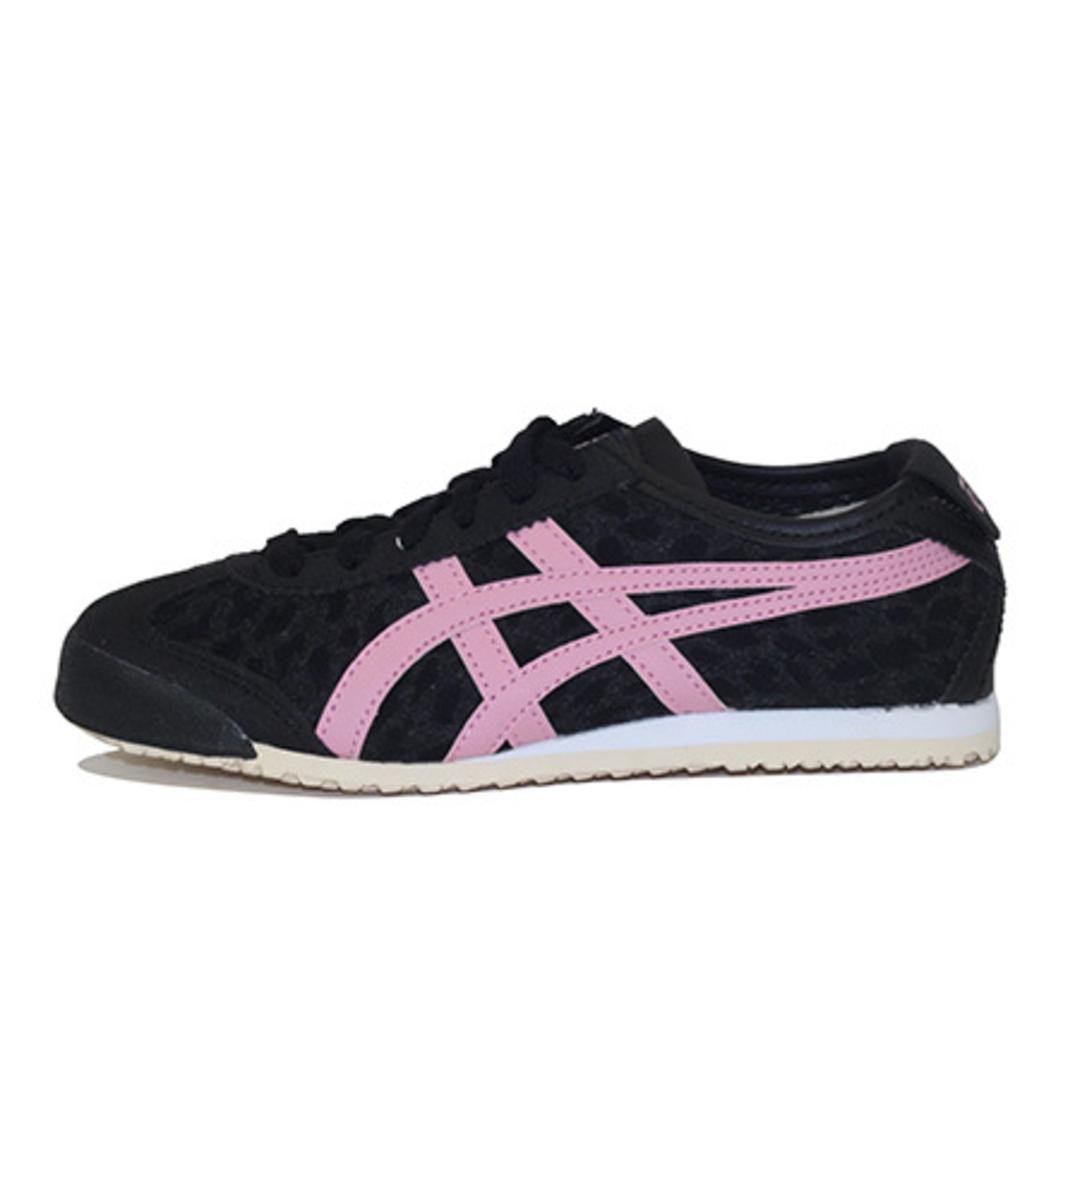 Onitsuka Tiger for Preschool: Mexico 66 PS Black/Pink Sneakers